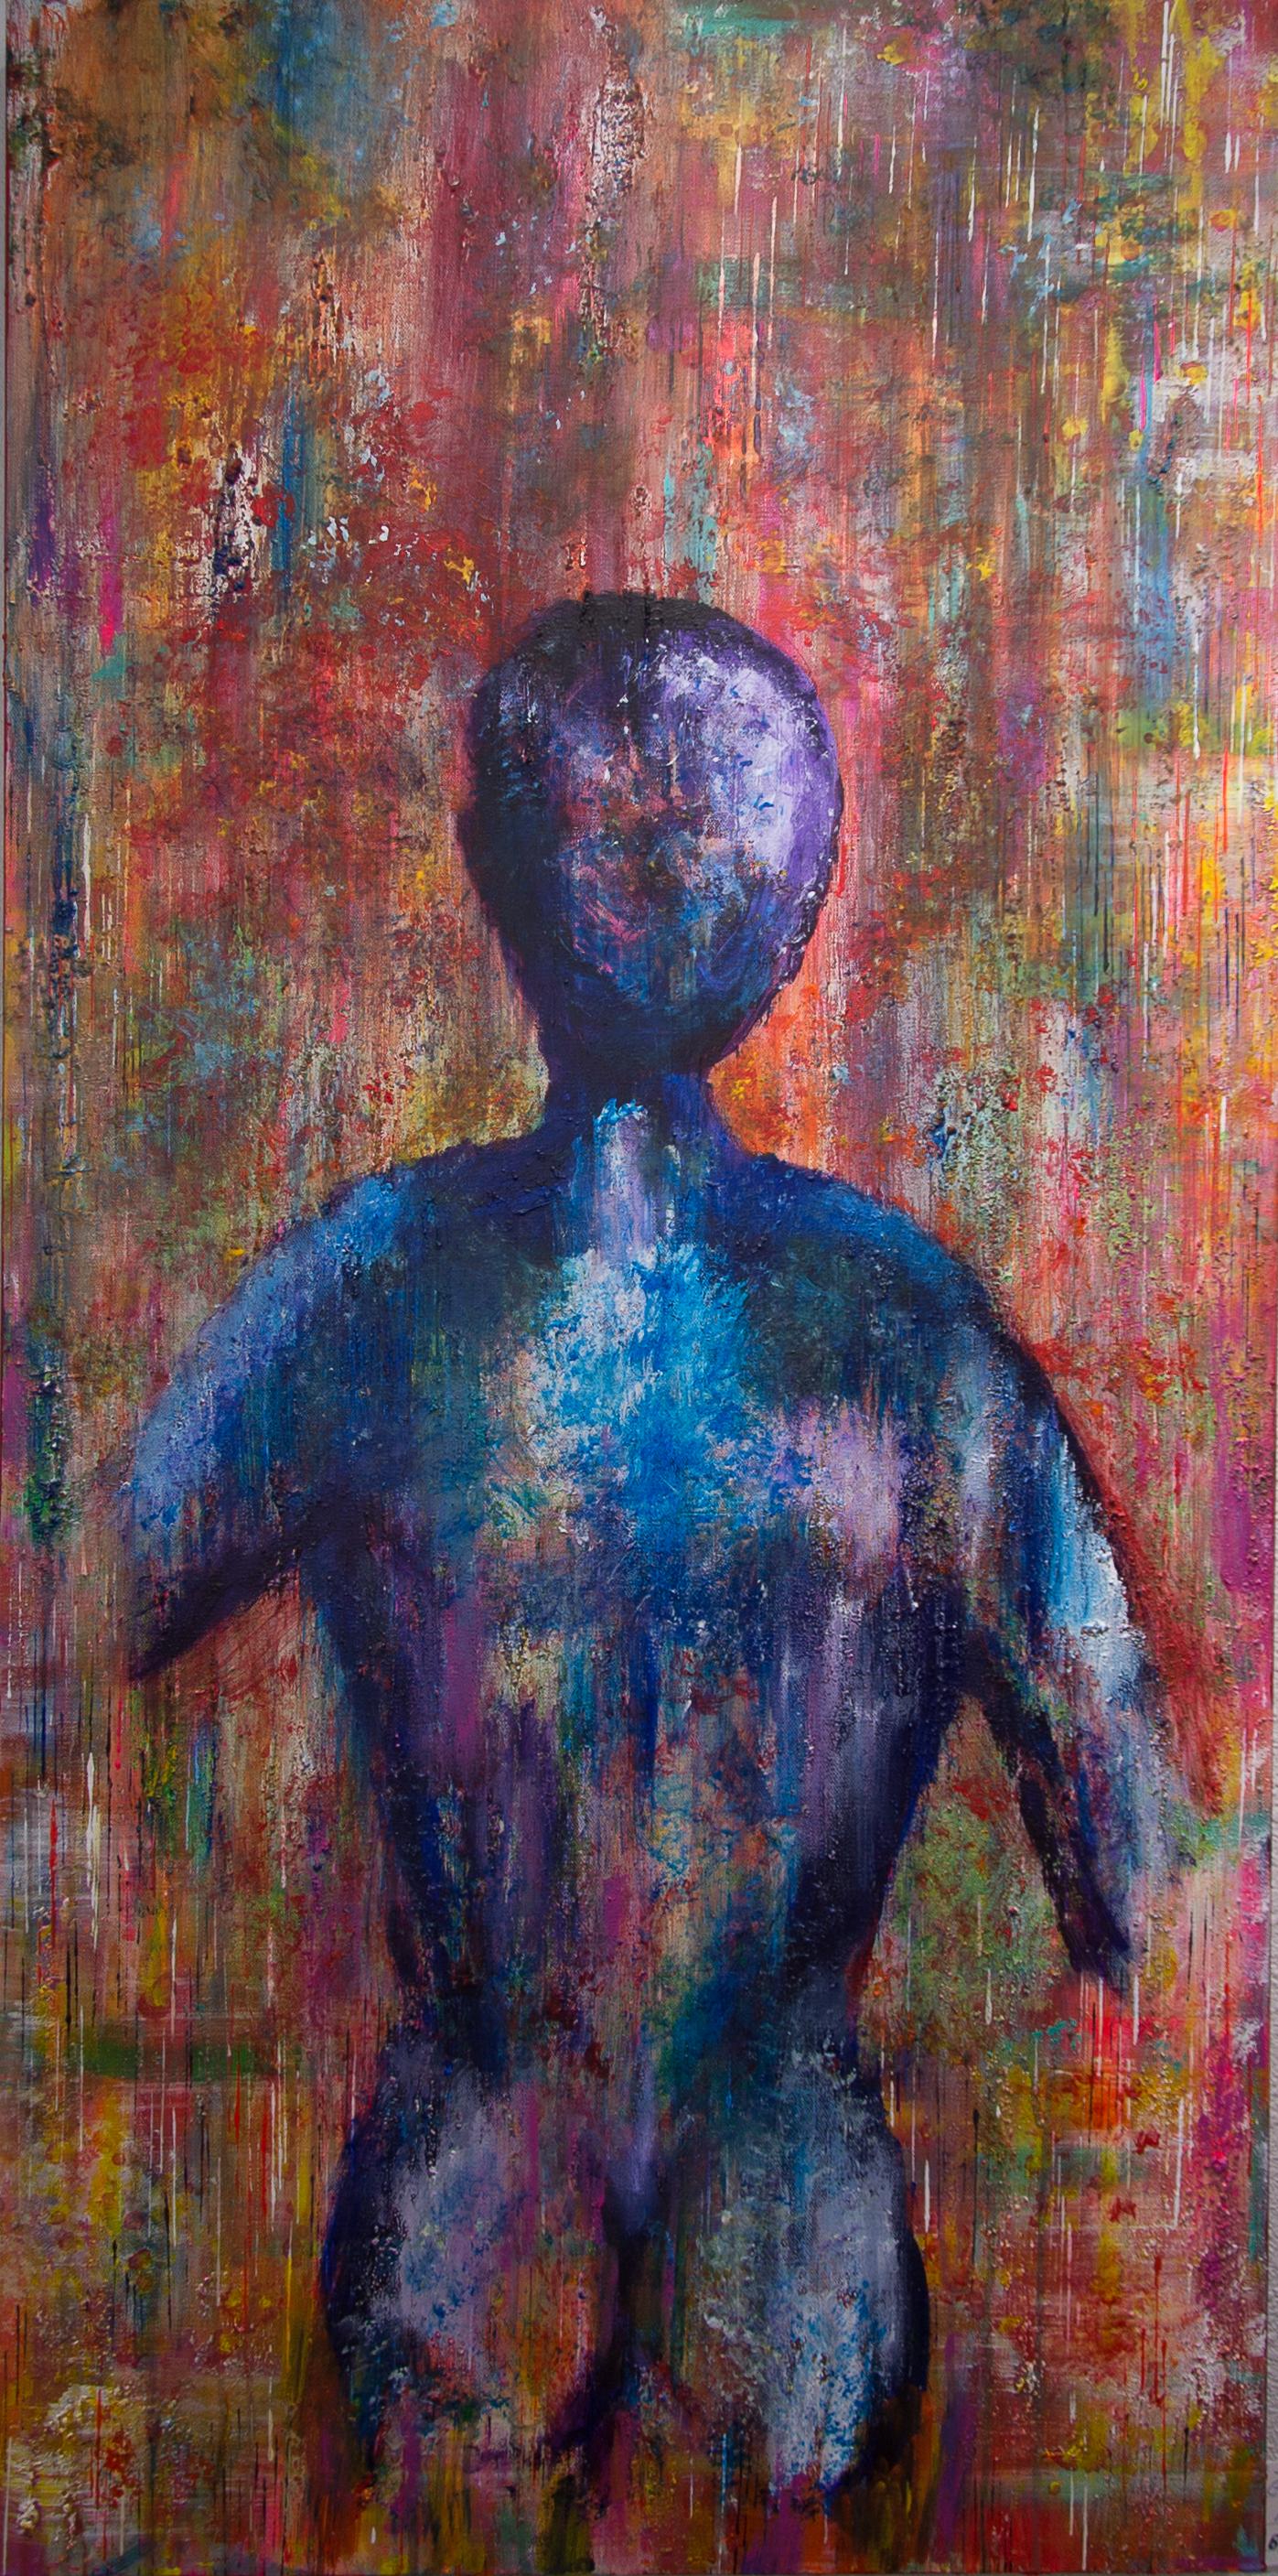 Gary Visconti  Figurative Painting - STARMAN- vertical red and blue figurative painting